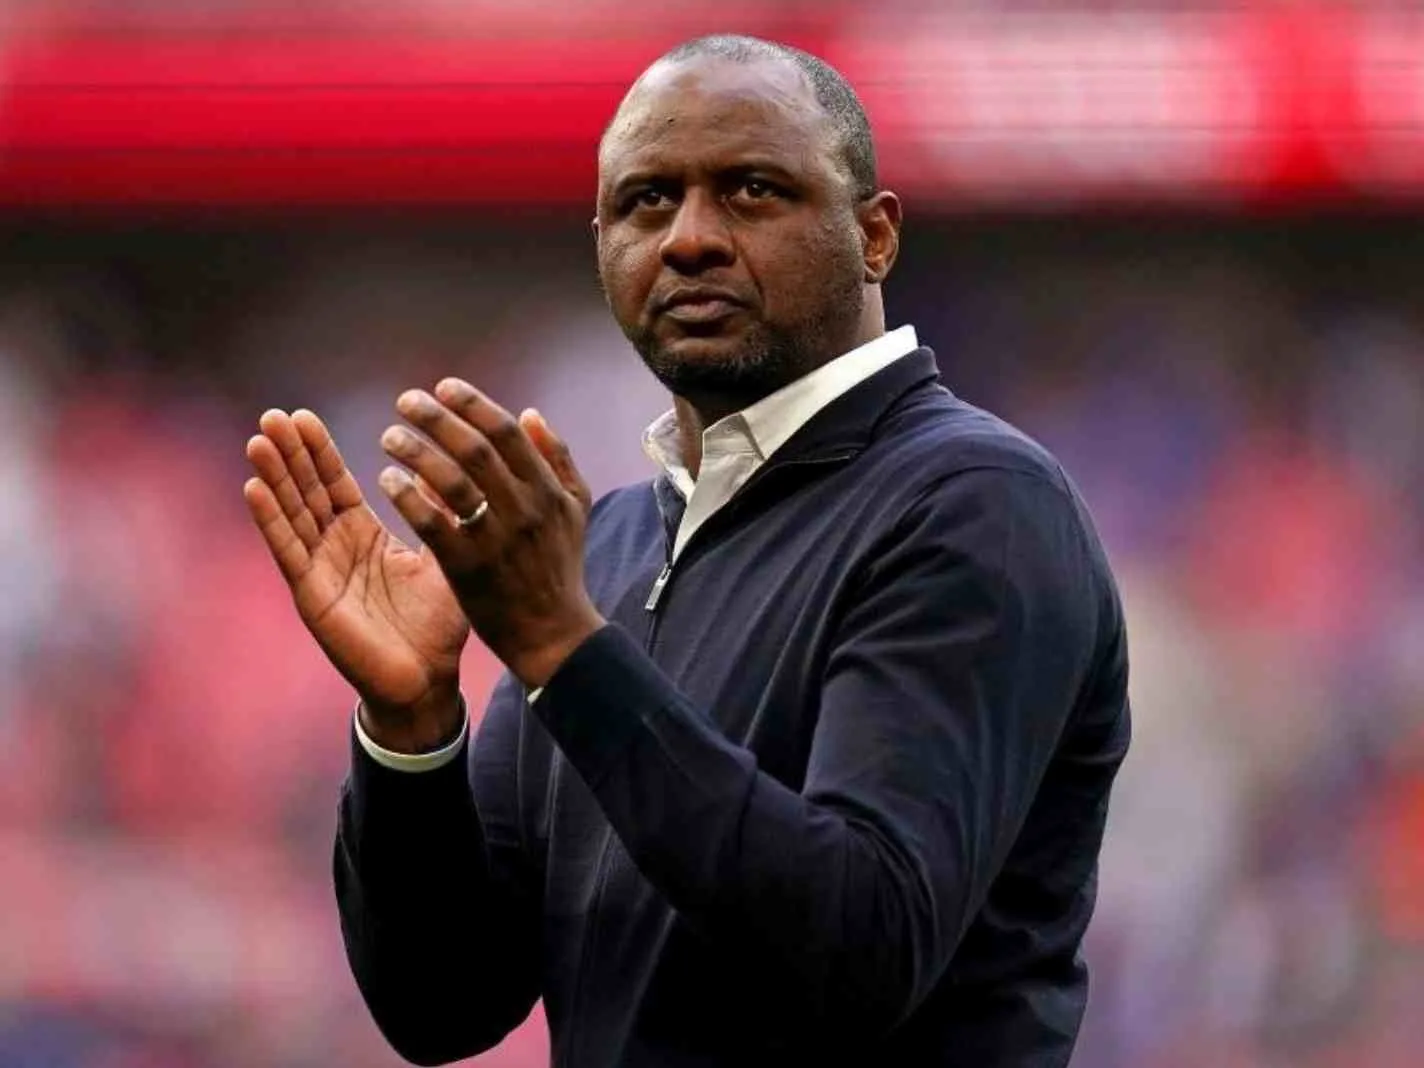 The photo shows Patrick Vieira clapping for the fans.